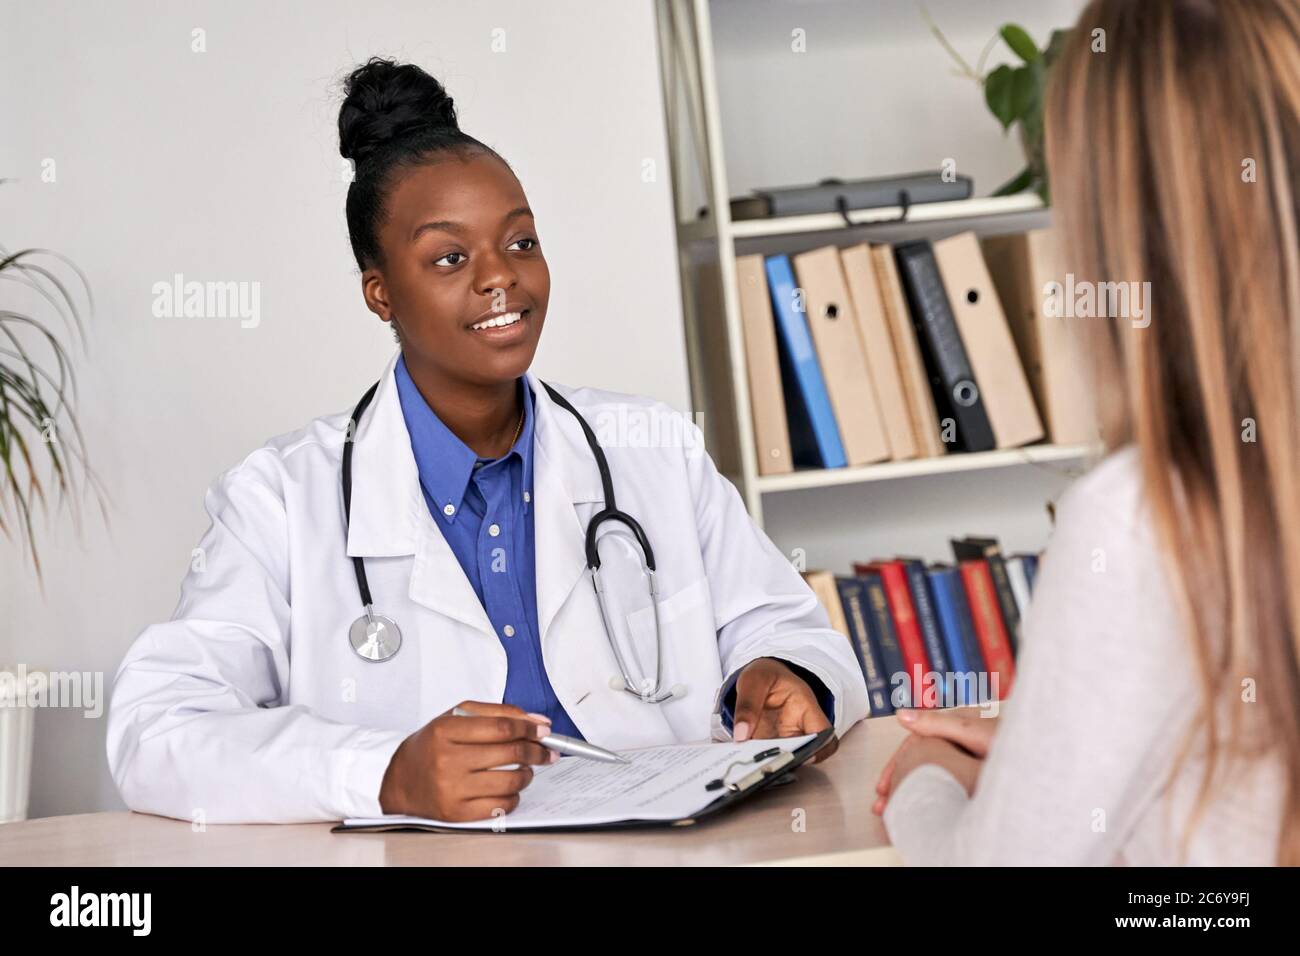 African doctor physician consulting caucasian woman patient at medical visit. Stock Photo